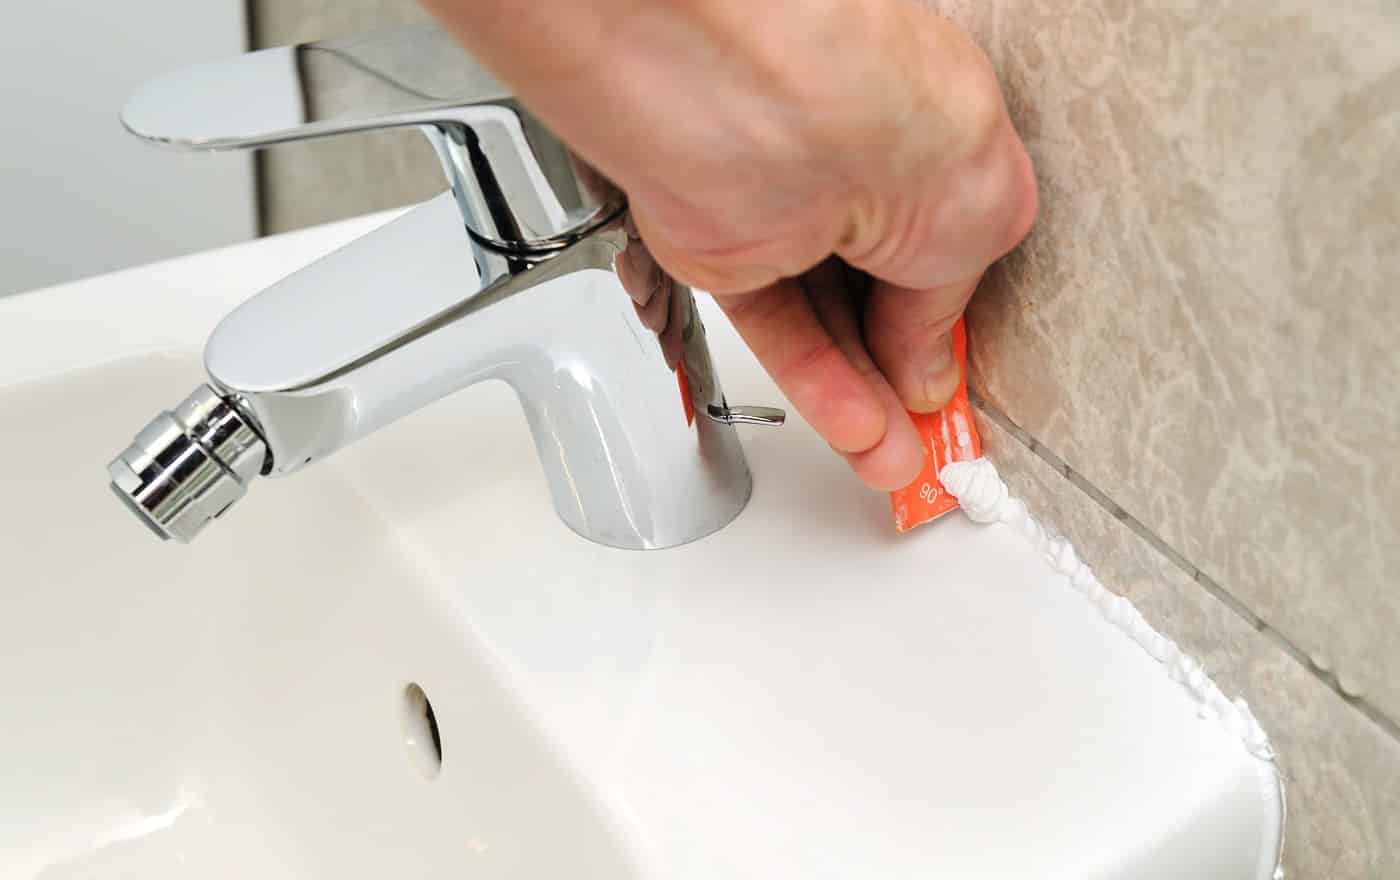 Worker smoothing silicone sealant between the bidet and the wall using a spatula.